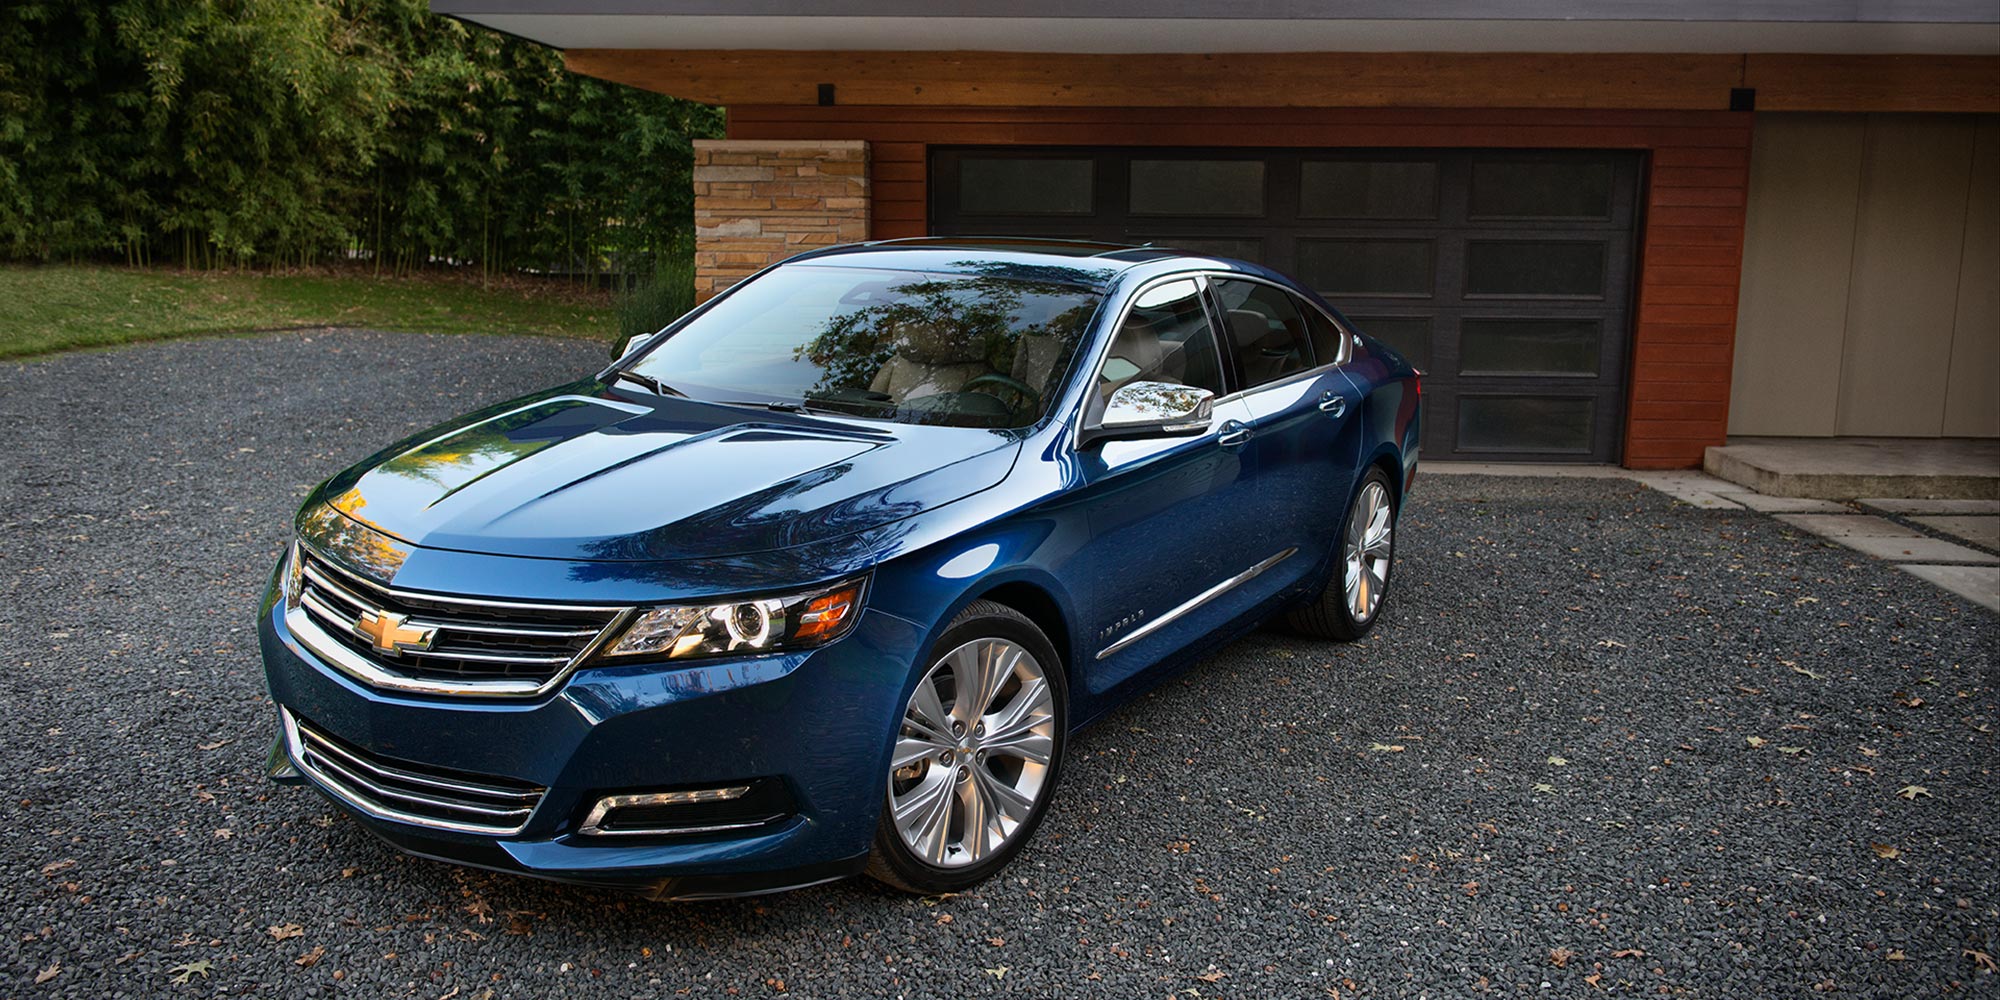 2018 Chevrolet Impala Airbags, Safety Features, Safety Score